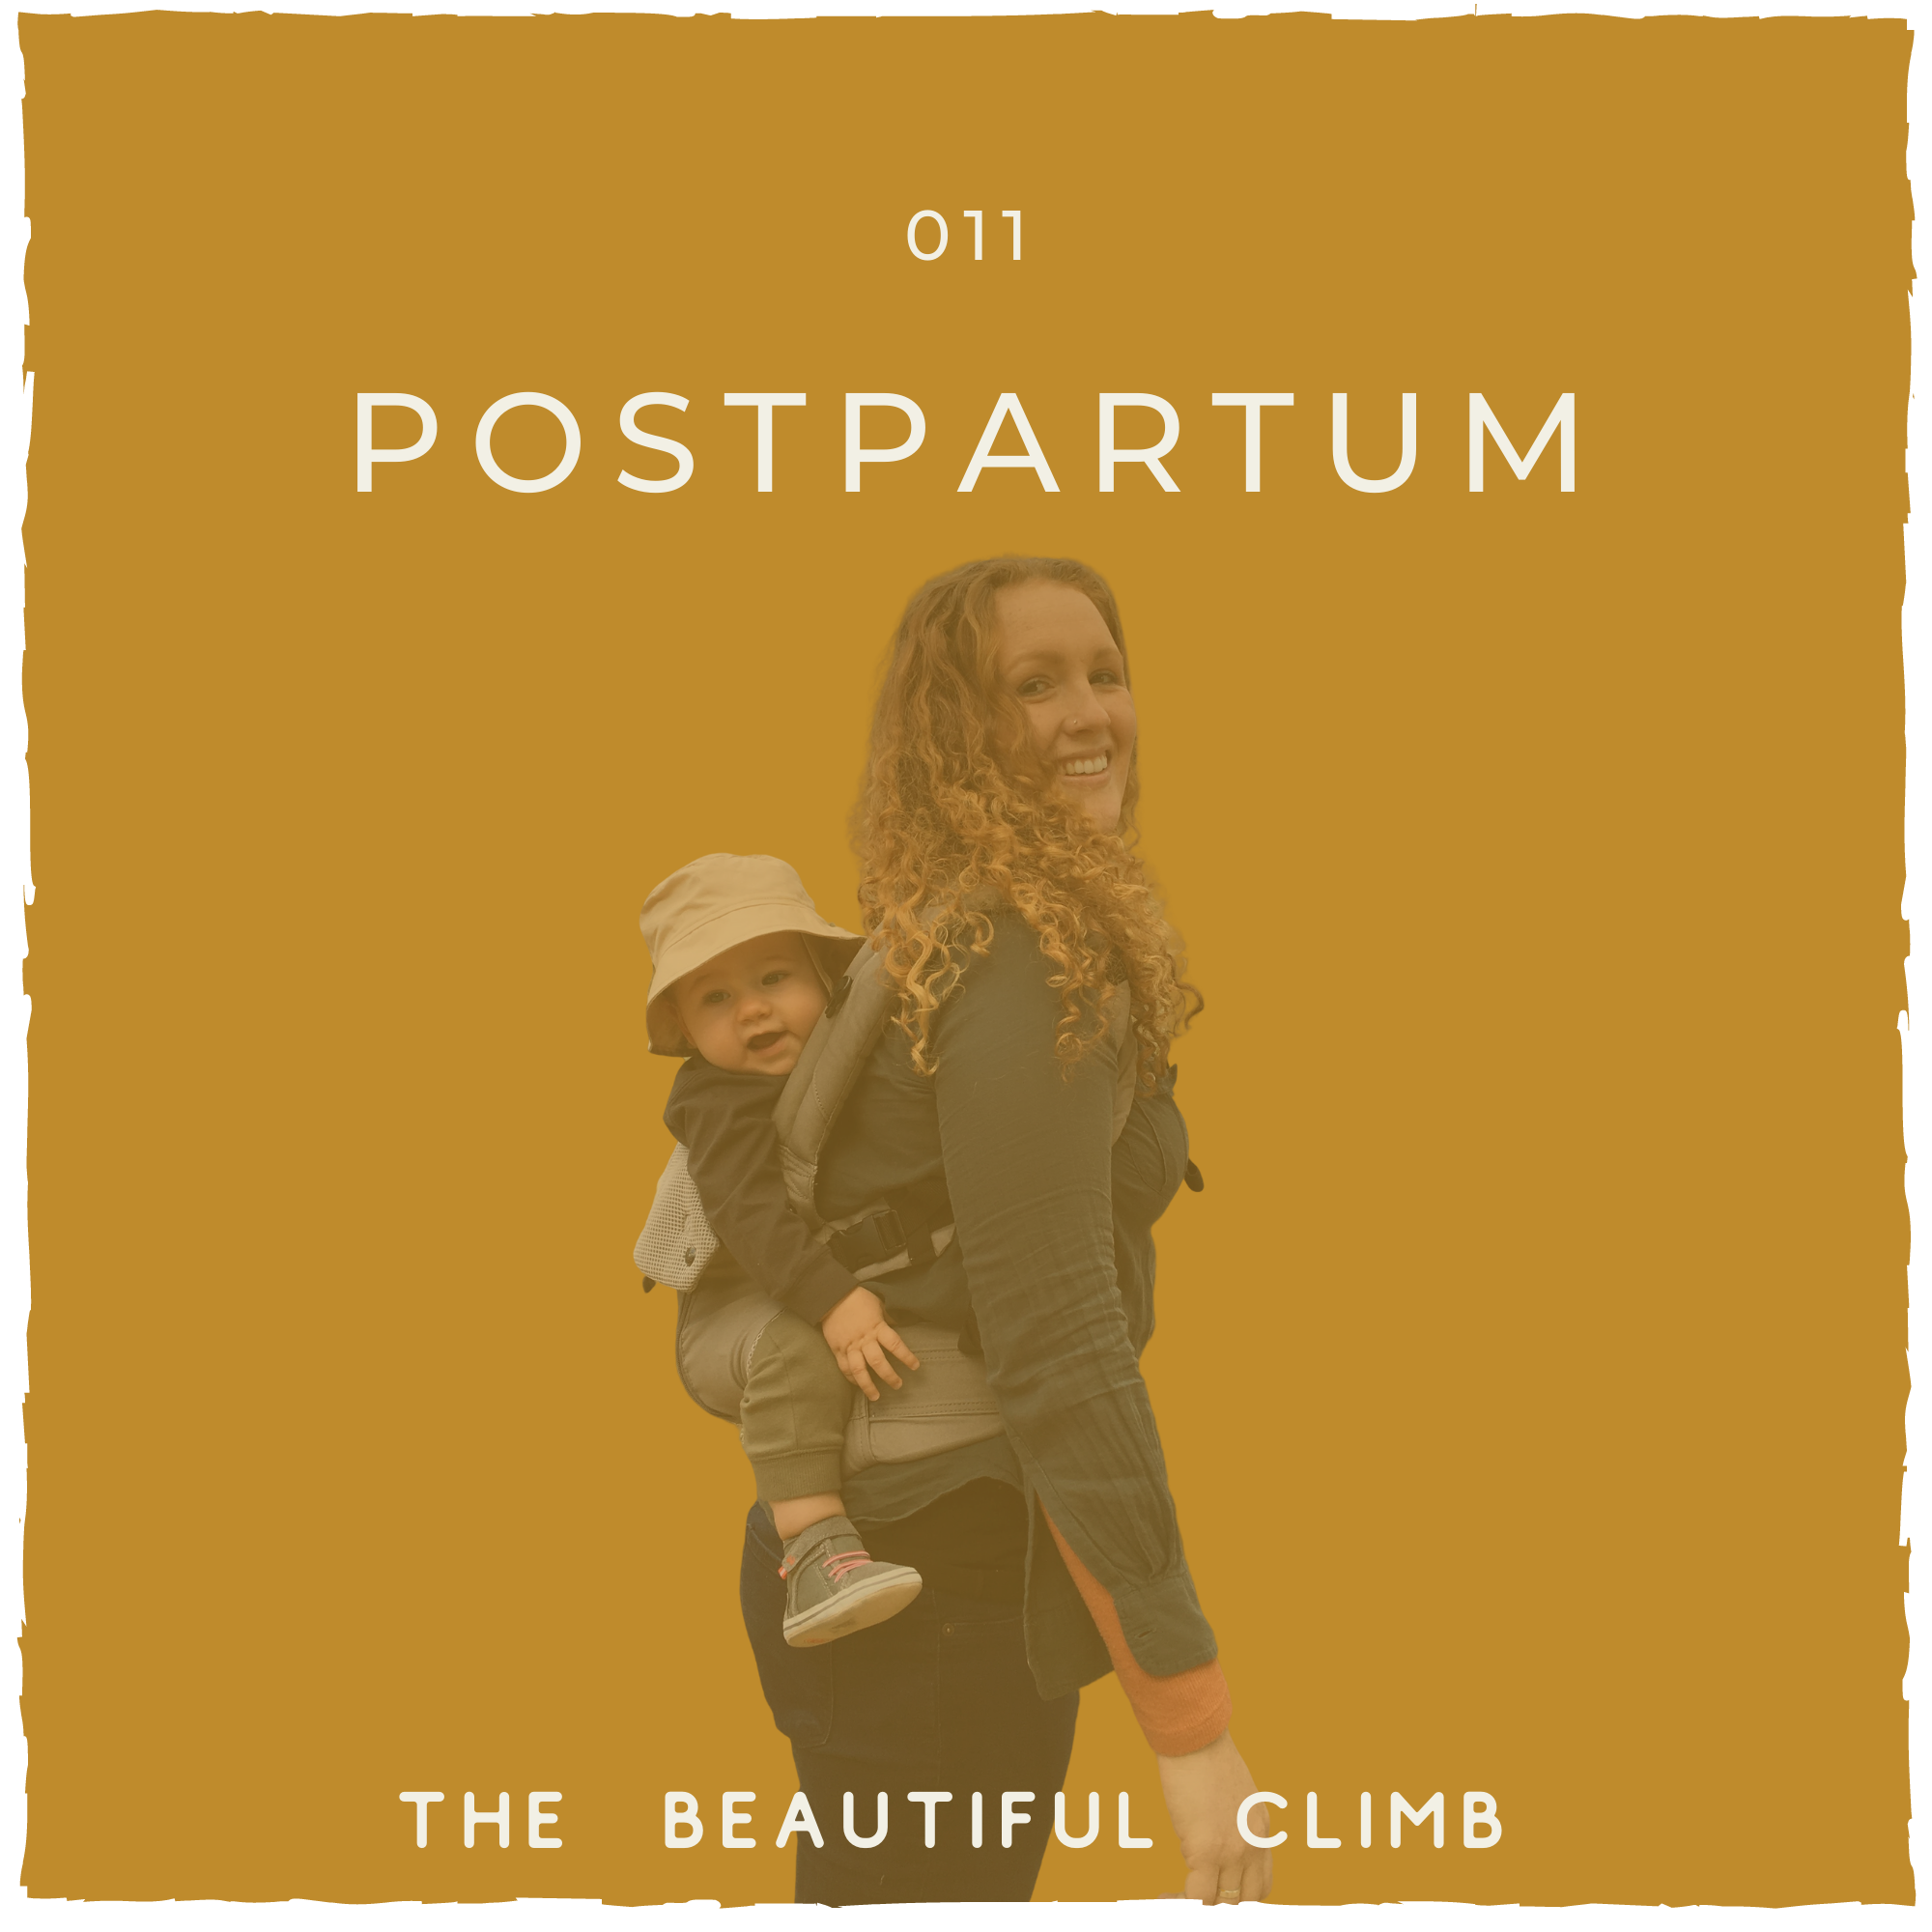 I felt so prepared for the birth of my son and labor, although that didn’t go as planned, and had never even thought about how my body and mind would change postpartum. In episode 11 of The Beautiful Climb podcast, I'm sharing my experience with postpartum depression and opening up about the shame and guilt I was feeling after the birth of my son. | Michelle Knight Co.